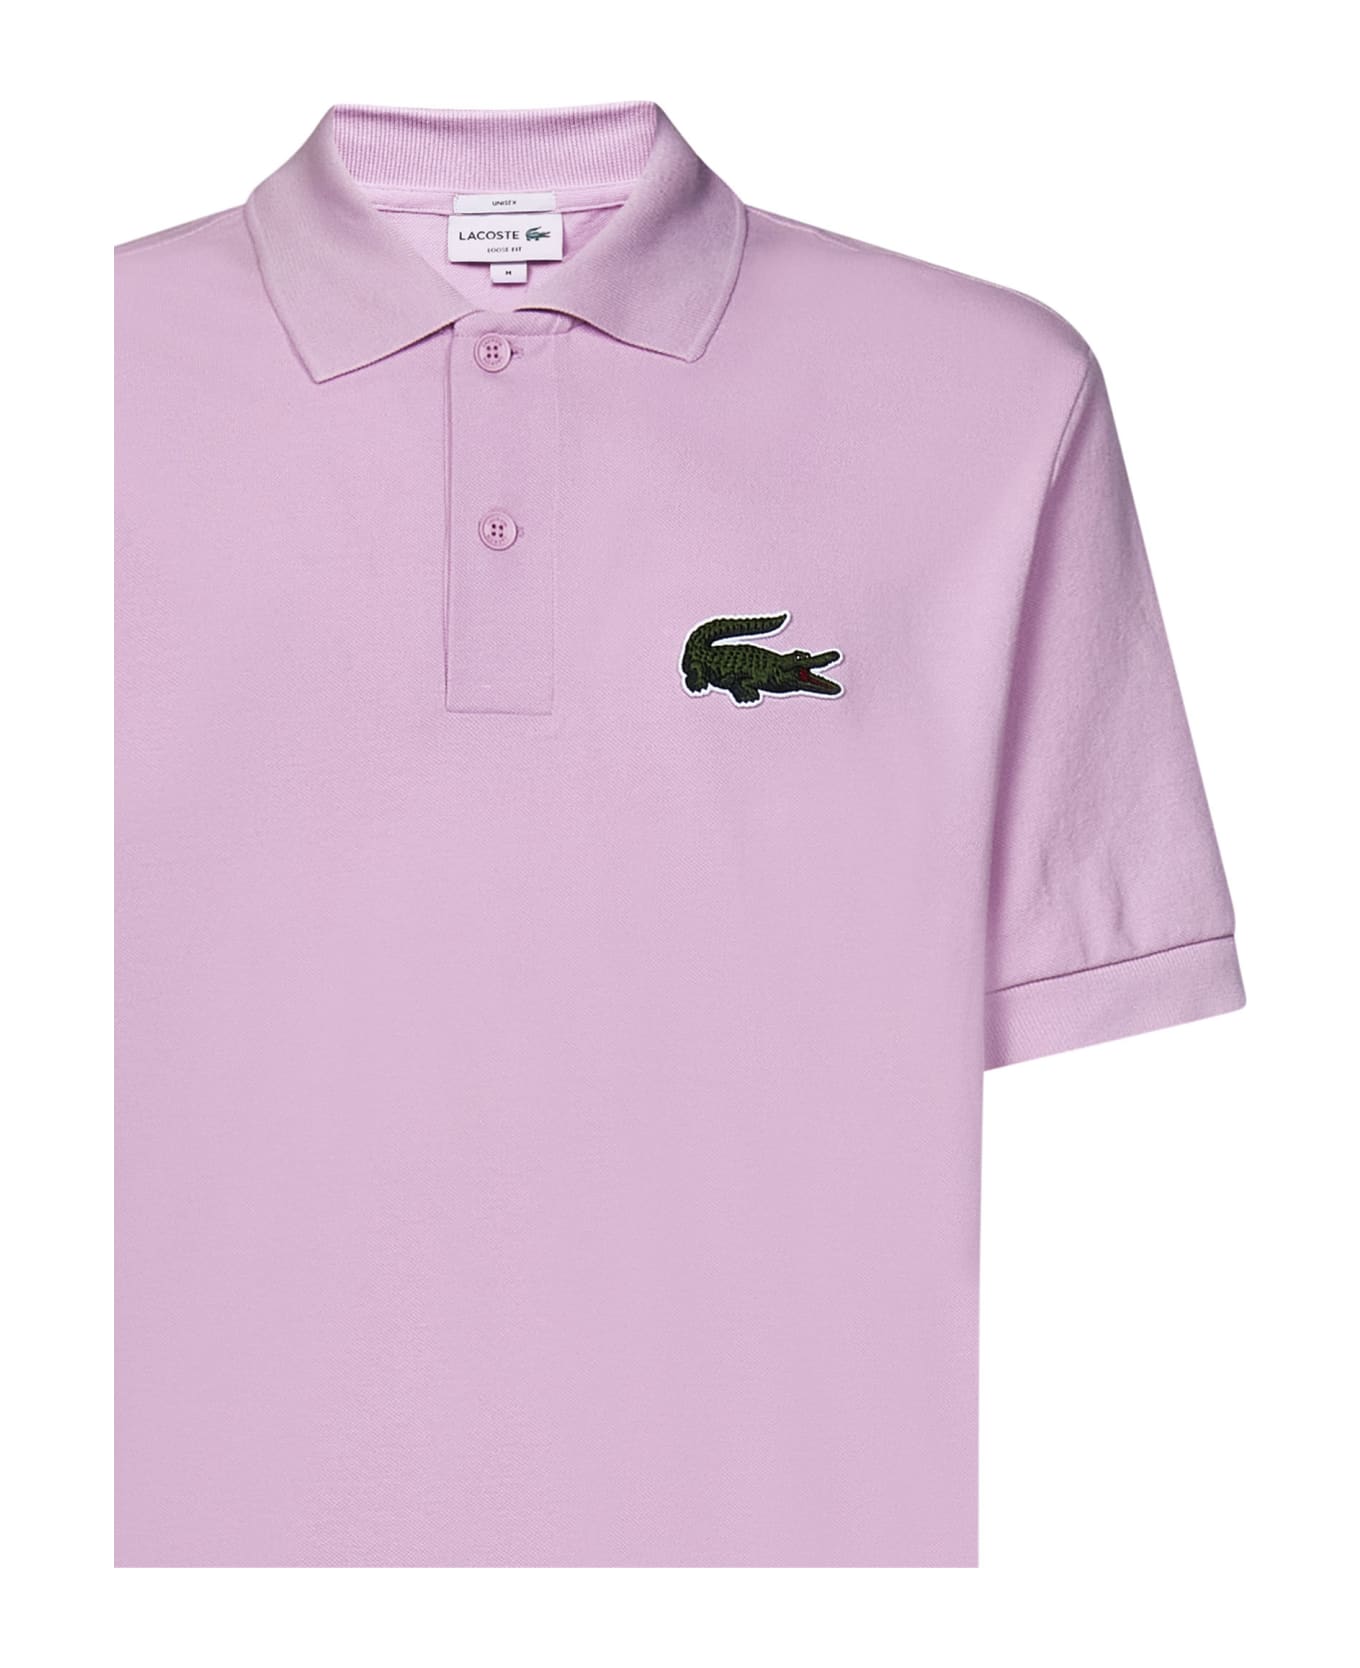 Lacoste Original Polo L.12.12 Loose Fit Polo Shirt - Pink name:472